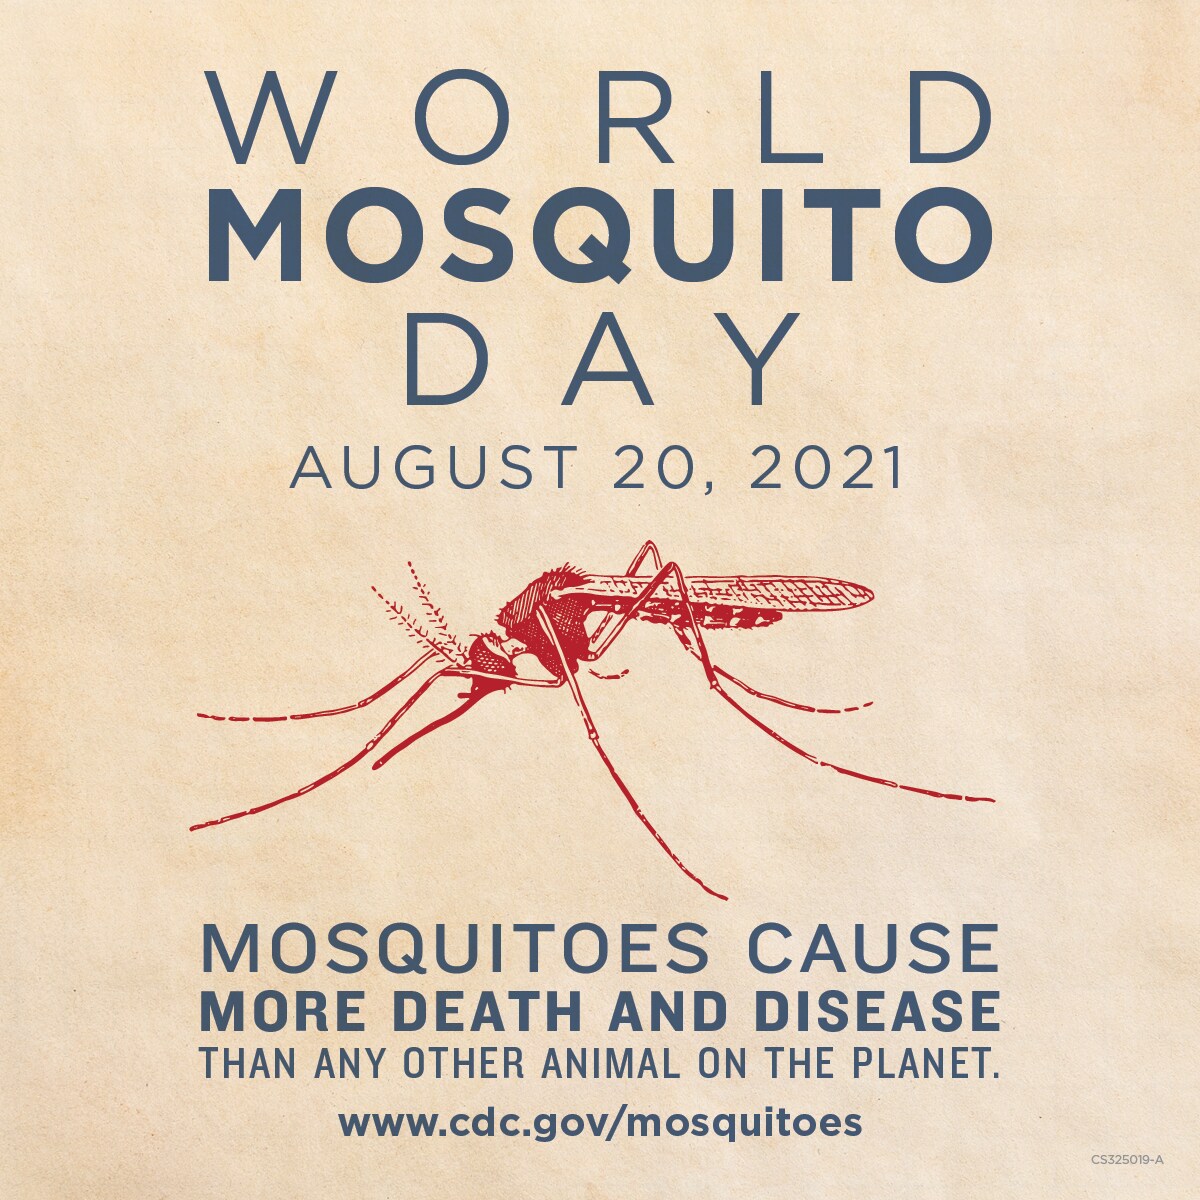 World Mosquito Day August 20, 2021 - Mosquitoes cause more death & disease than any other animal on the planet